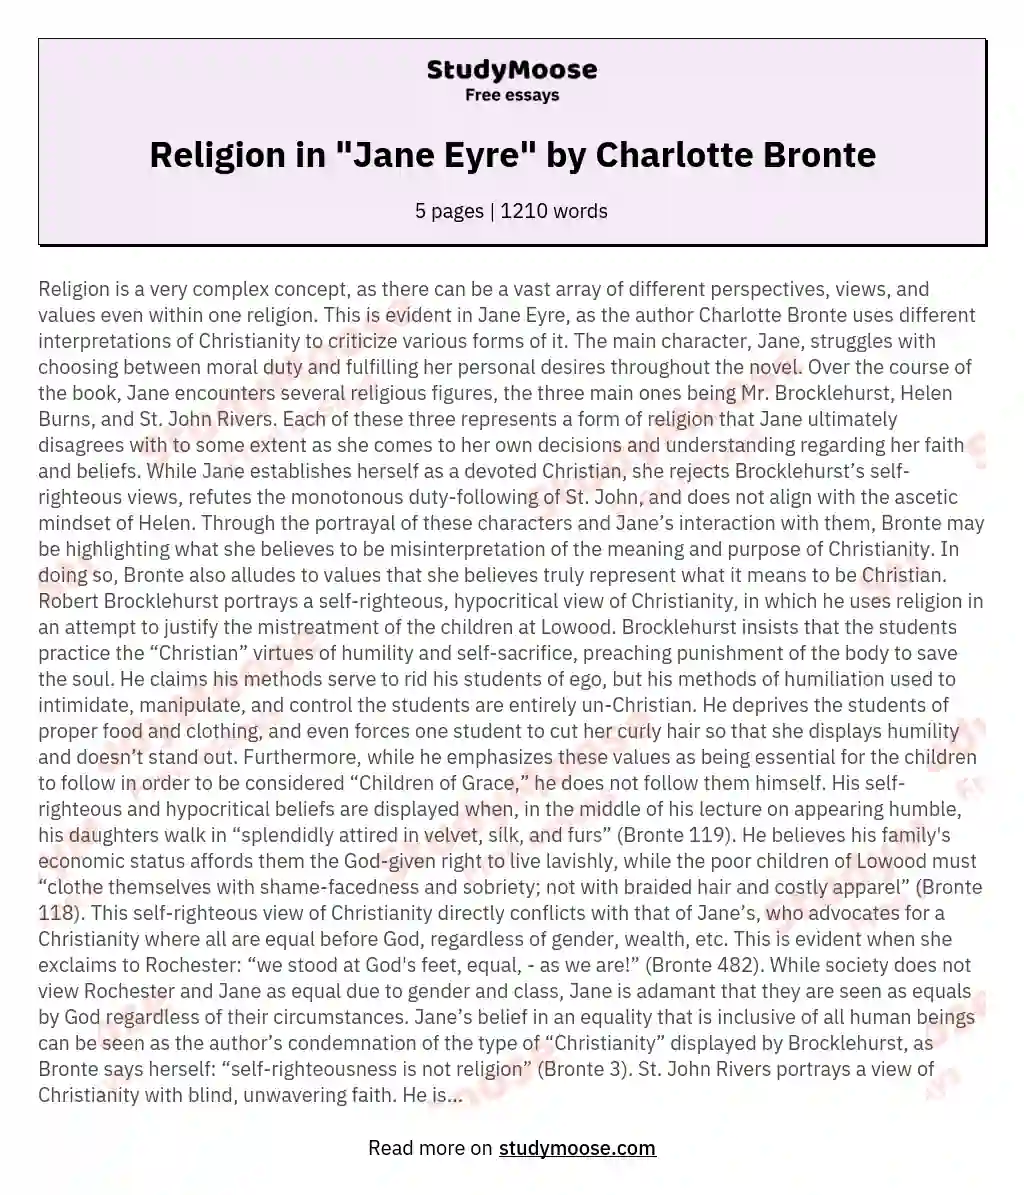 Religion in "Jane Eyre" by Charlotte Bronte